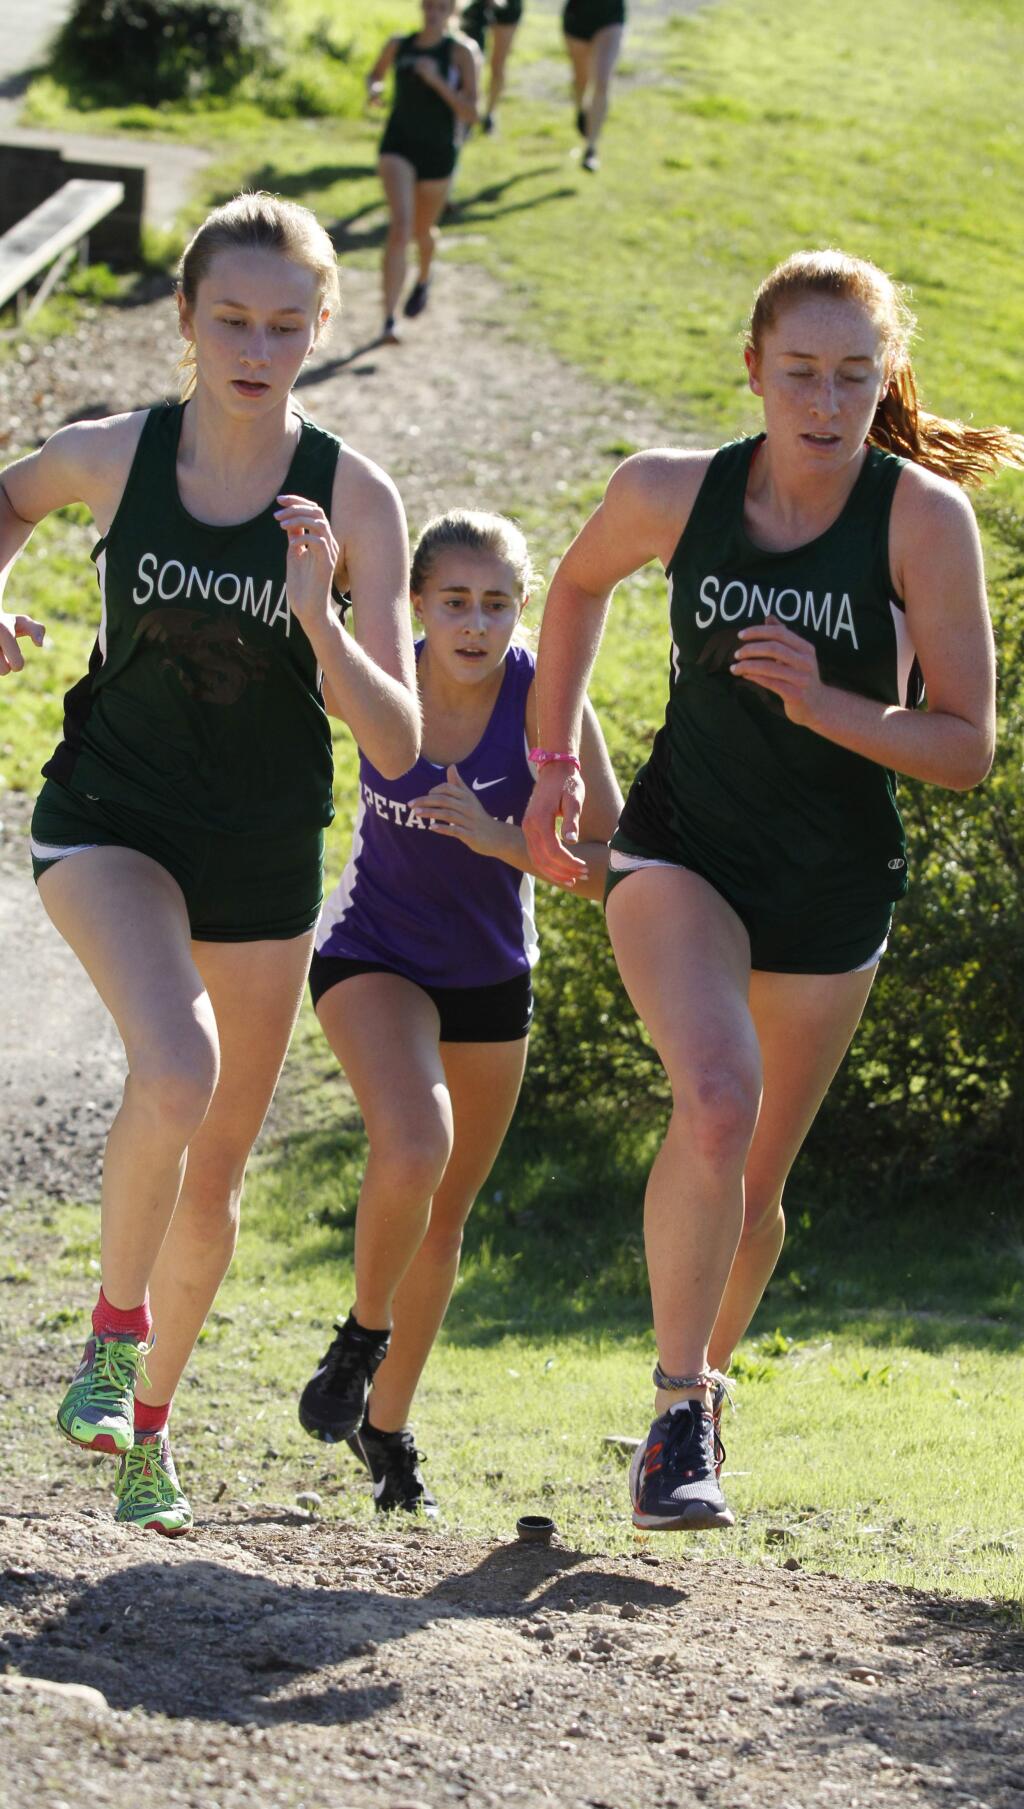 Bill Hoban/Index-TribuneSonoma's Malia Cashel, left, and Amy Stanfield, right, lead the pack during the first half of Wednesday's cross country meet at Maxwell Regional Park. The girls won and now sport a 6-0 league mark. Both the girls and boys teams will be competing in the SCL meet on Saturday, Nov. 5.